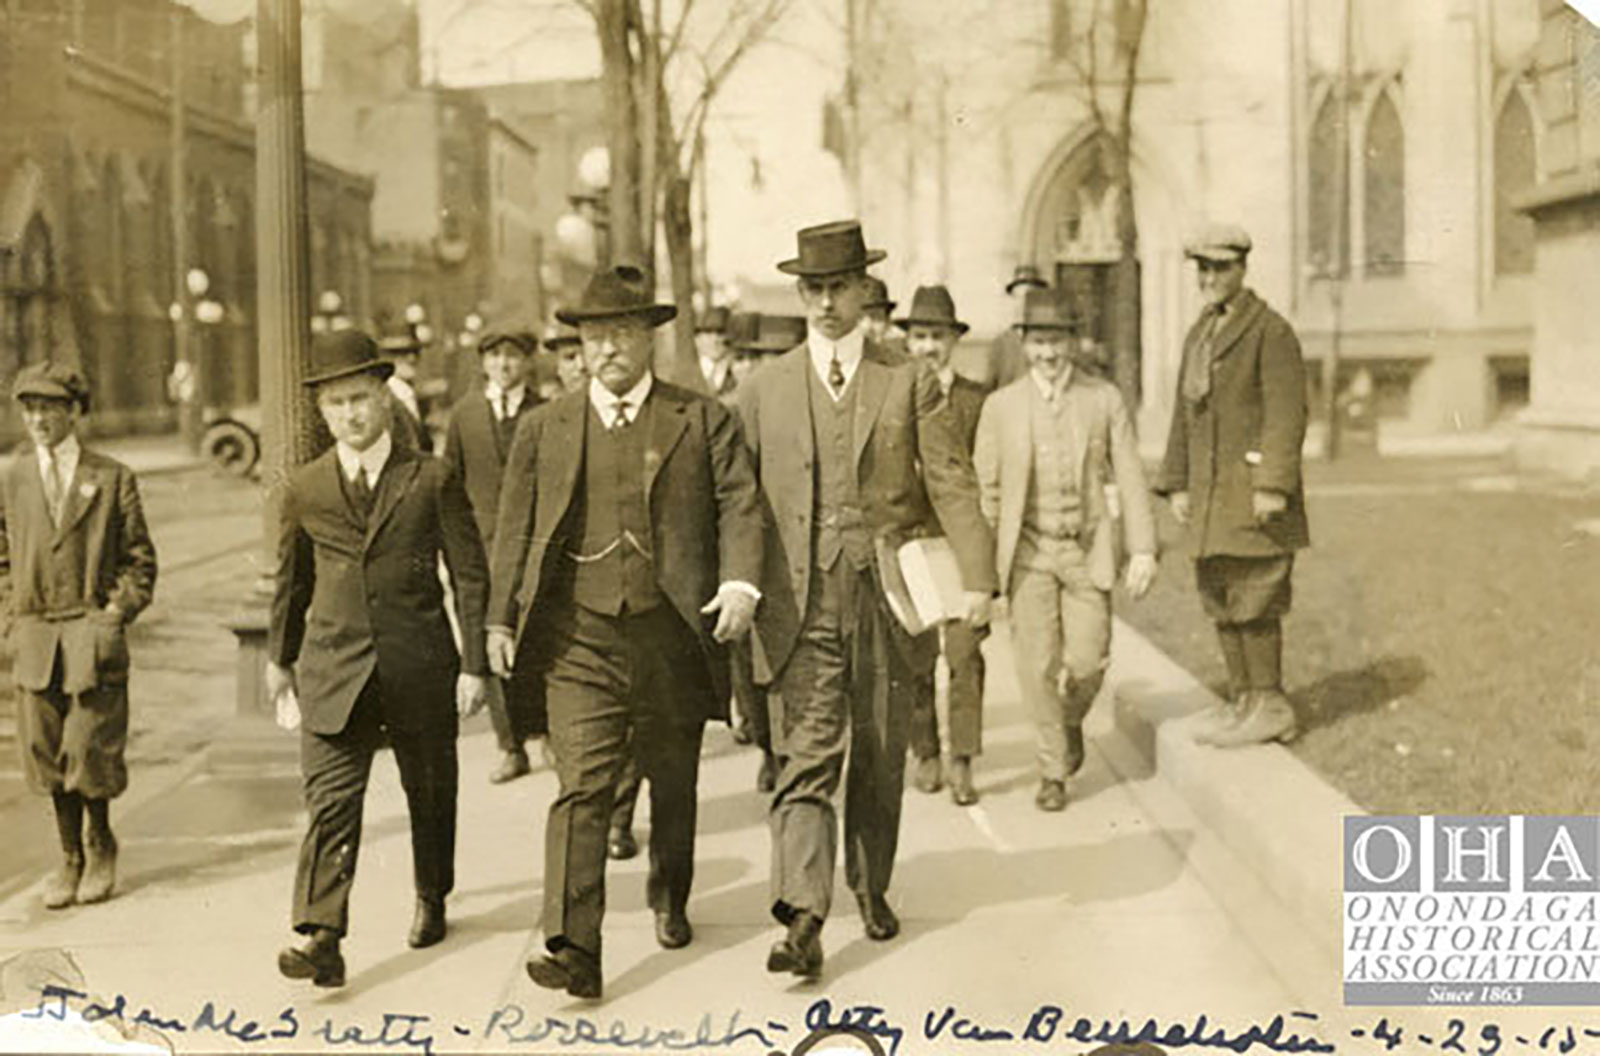 In this 1915 photo from the Onondaga Historical Association shows Theodore Roosevelt in Syracuse, New York, during the William Barnes vs. Theodore Roosevelt libel suit.